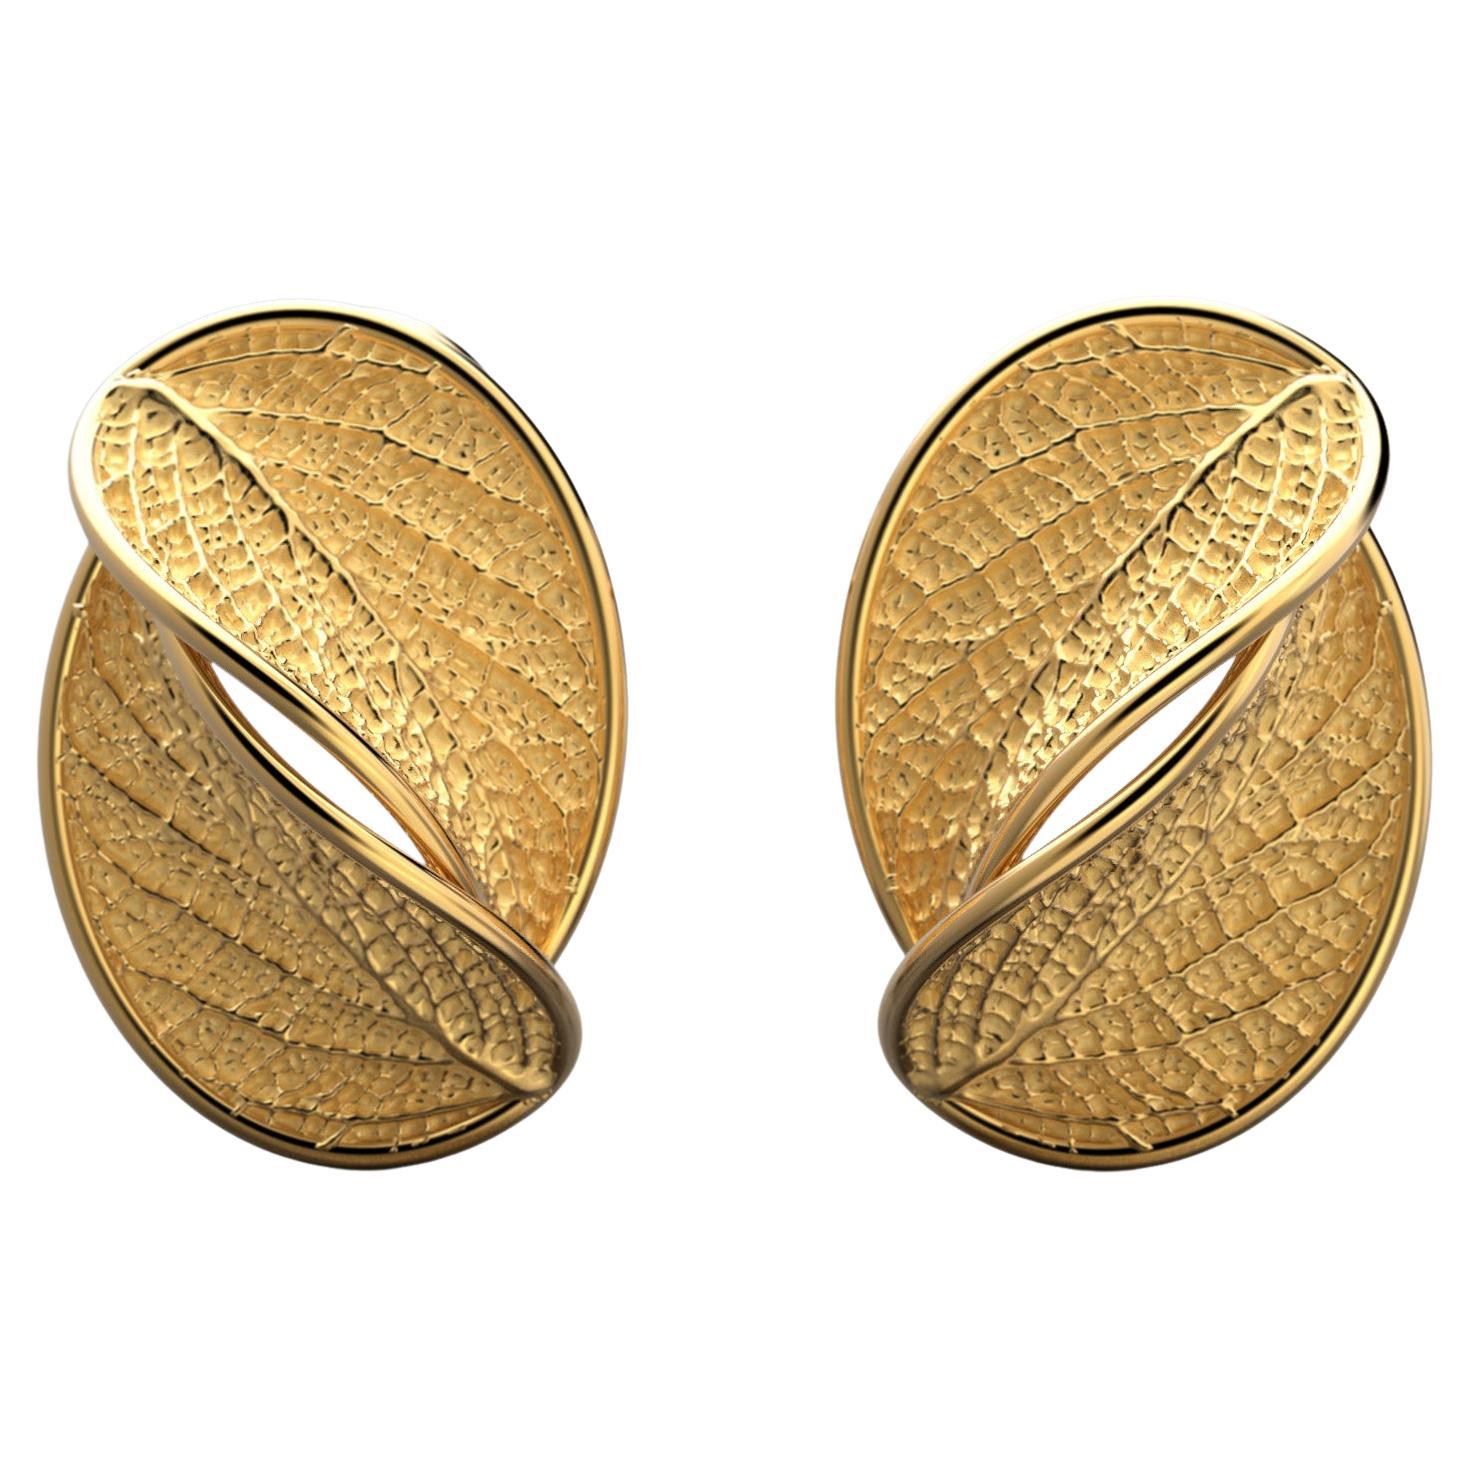 14k Gold Nature Inspired Stud Earrings with Leaf Design, Italian Fine Jewelry